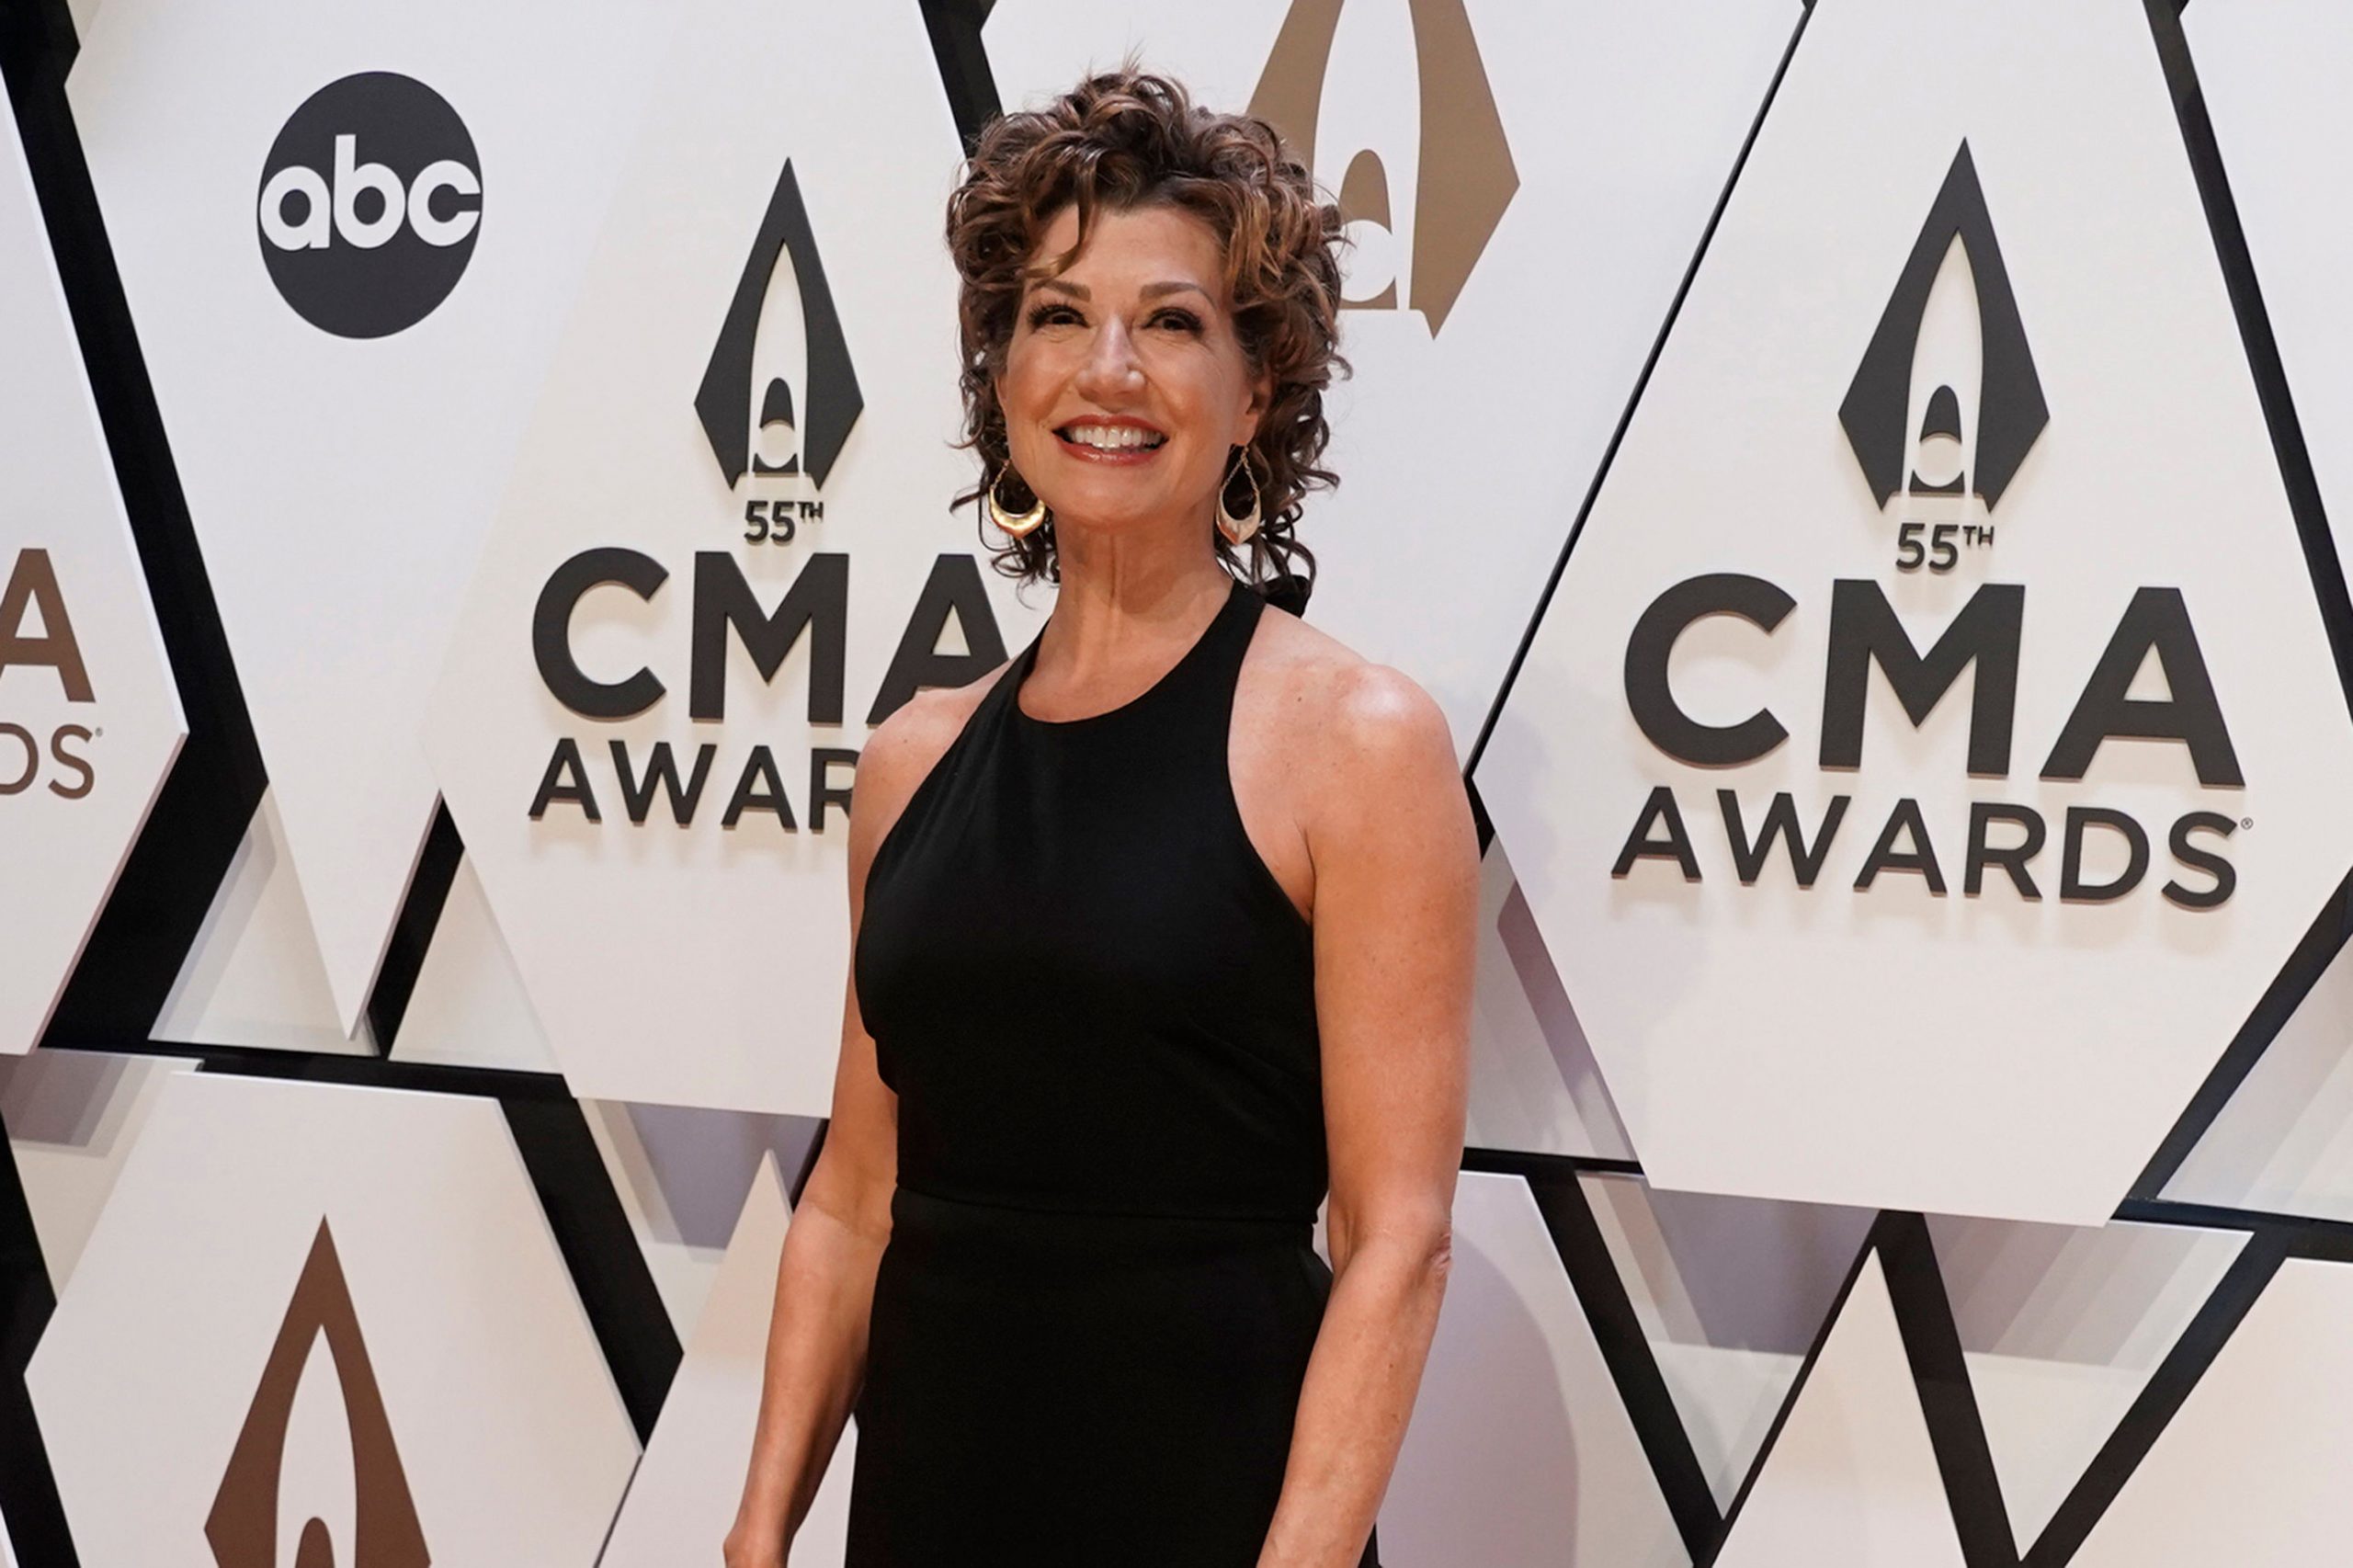 What happened to Amy Grant? Popular Christian Pop singer hospitalised after bike accident